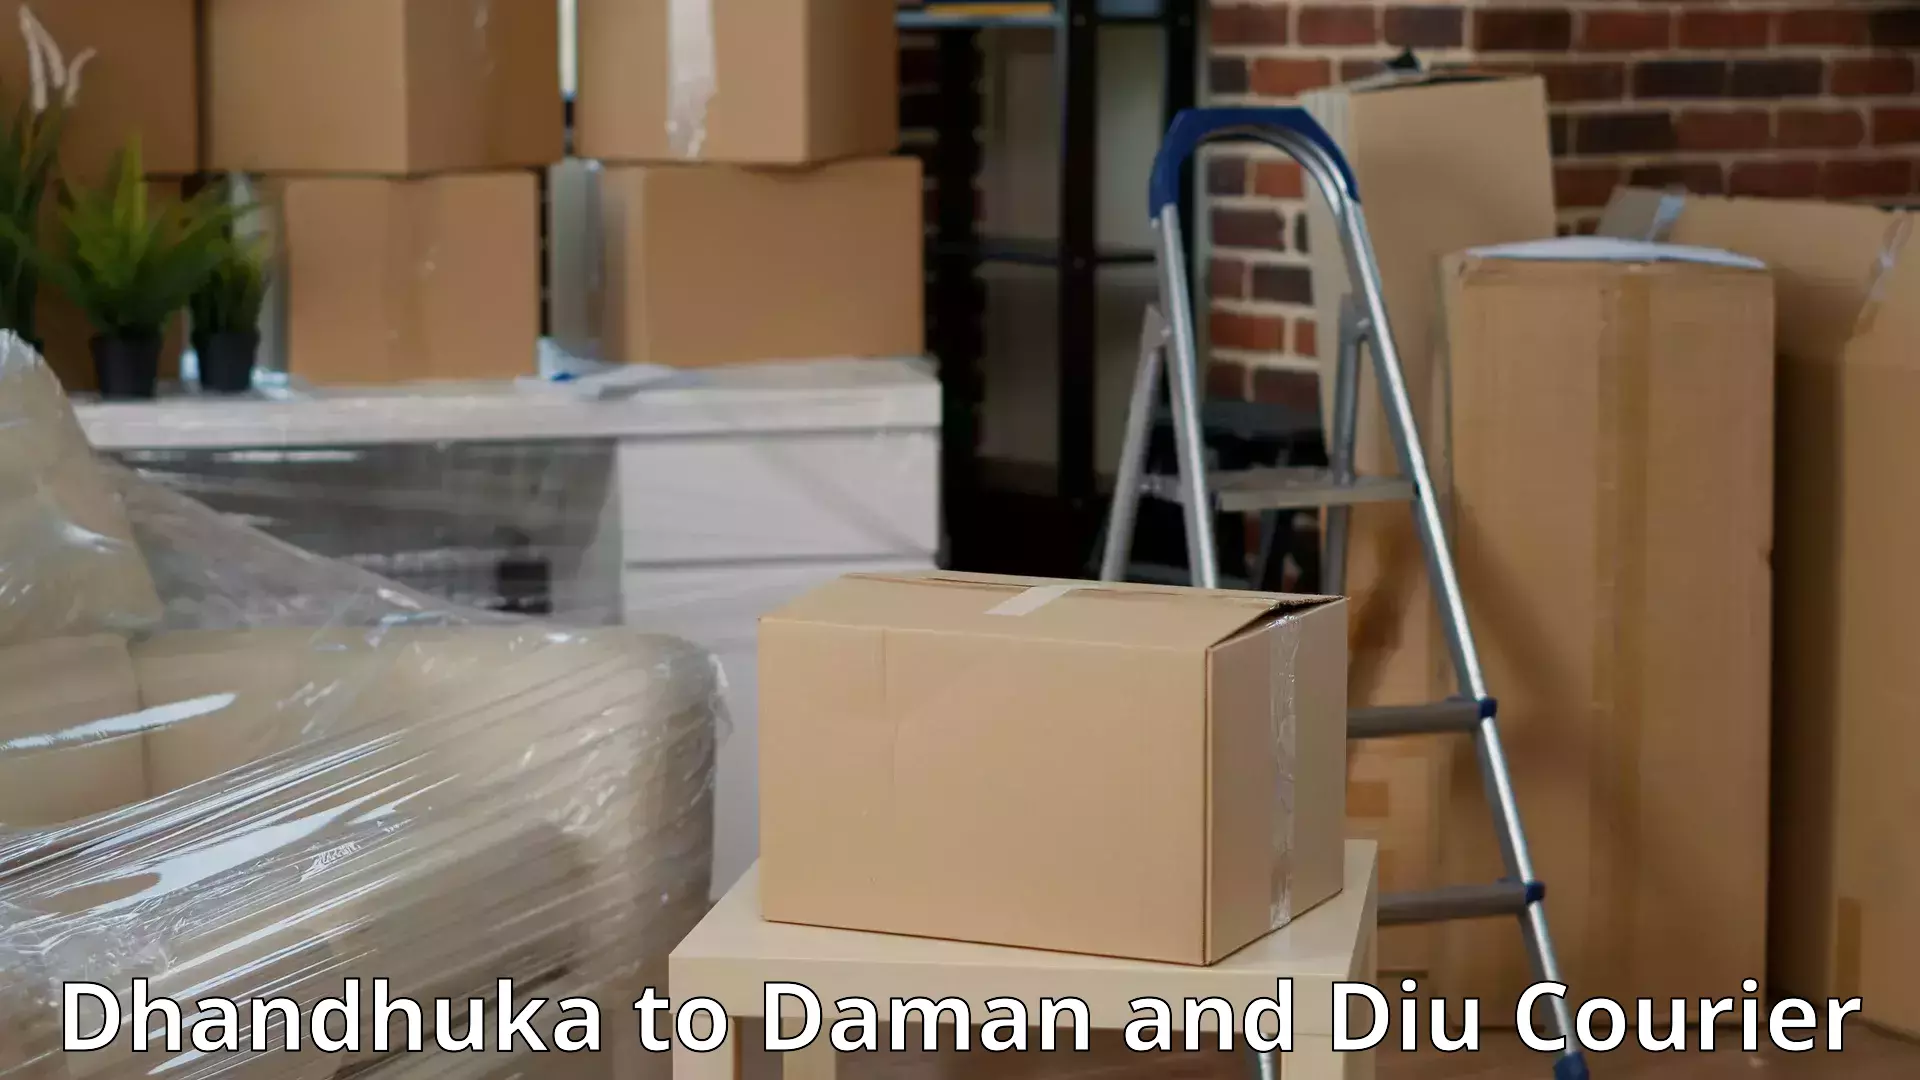 Professional movers and packers Dhandhuka to Daman and Diu